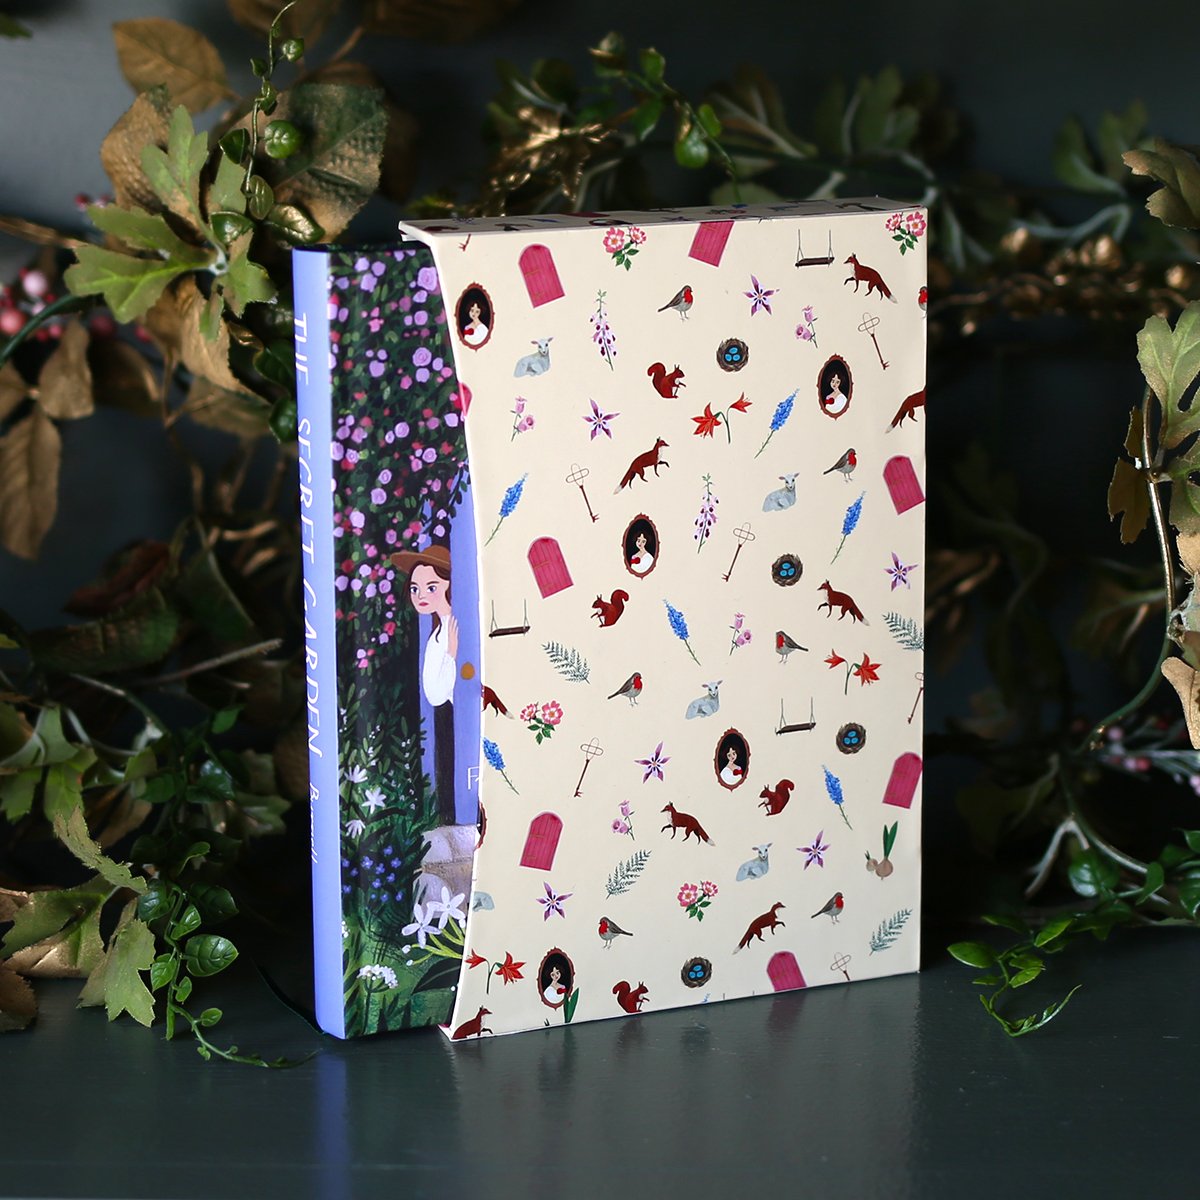 The Secret Garden special edition with a custom slipcase and illustrations with garden aesthetic and purple stained edges